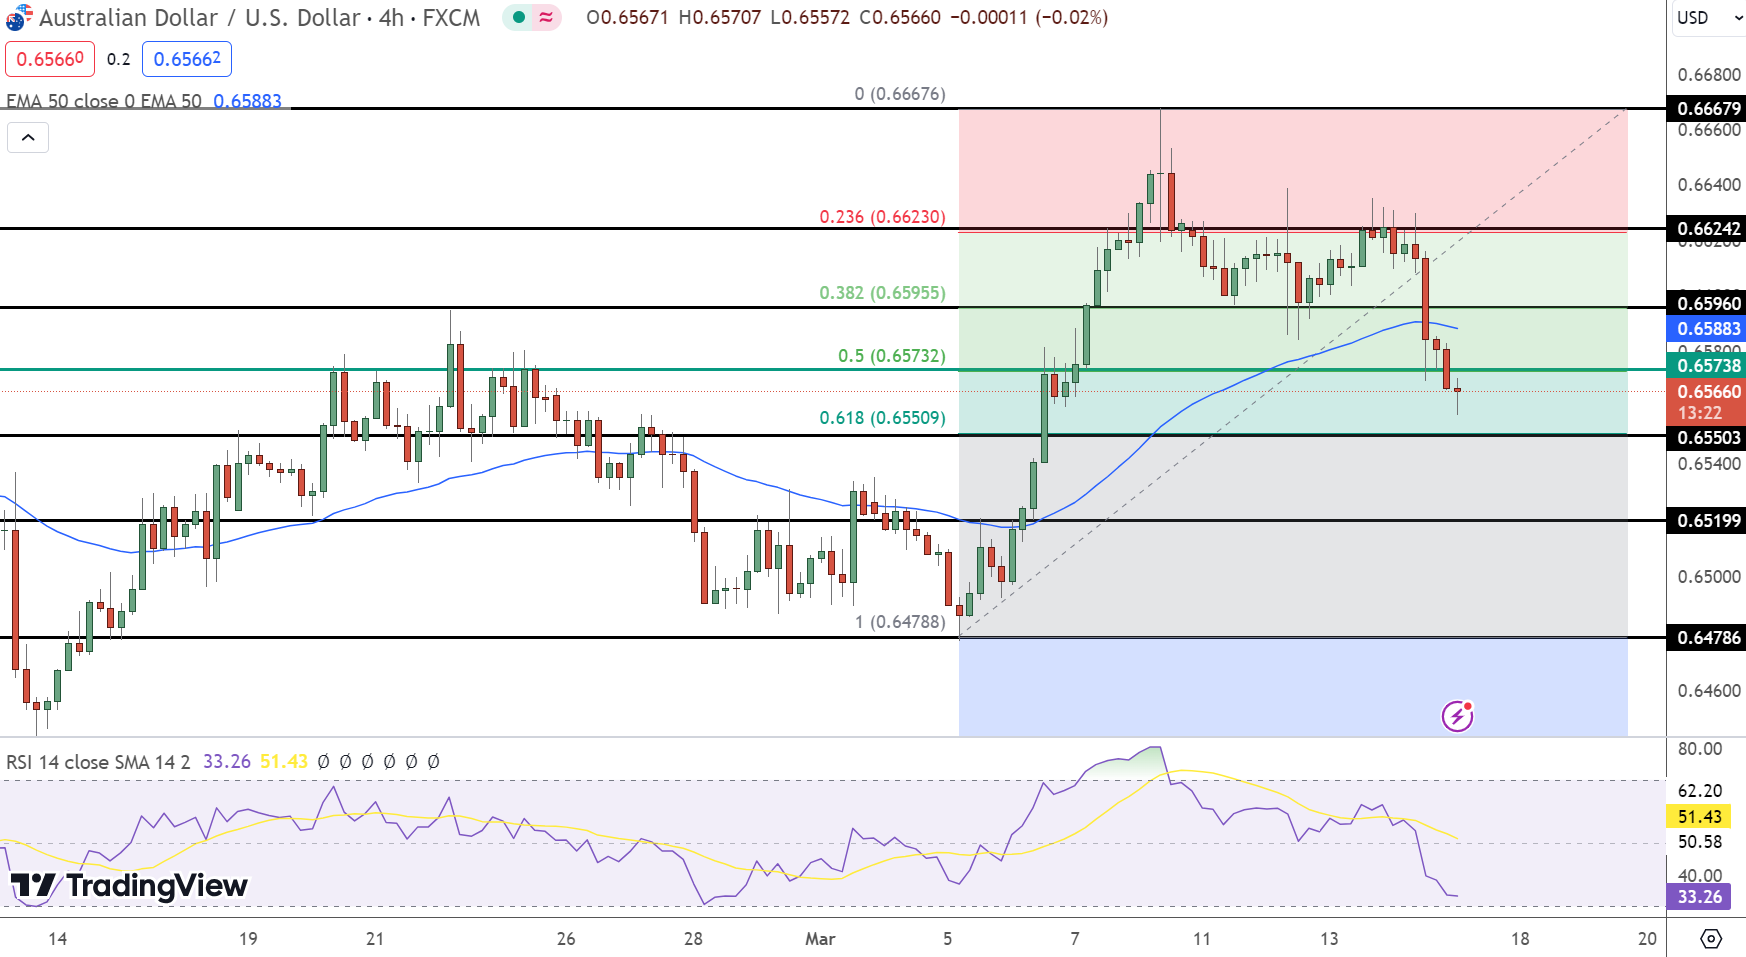 AUD/USD Price Forecast: Dips to $0.6566 Amid Strong US Economic Data Releases